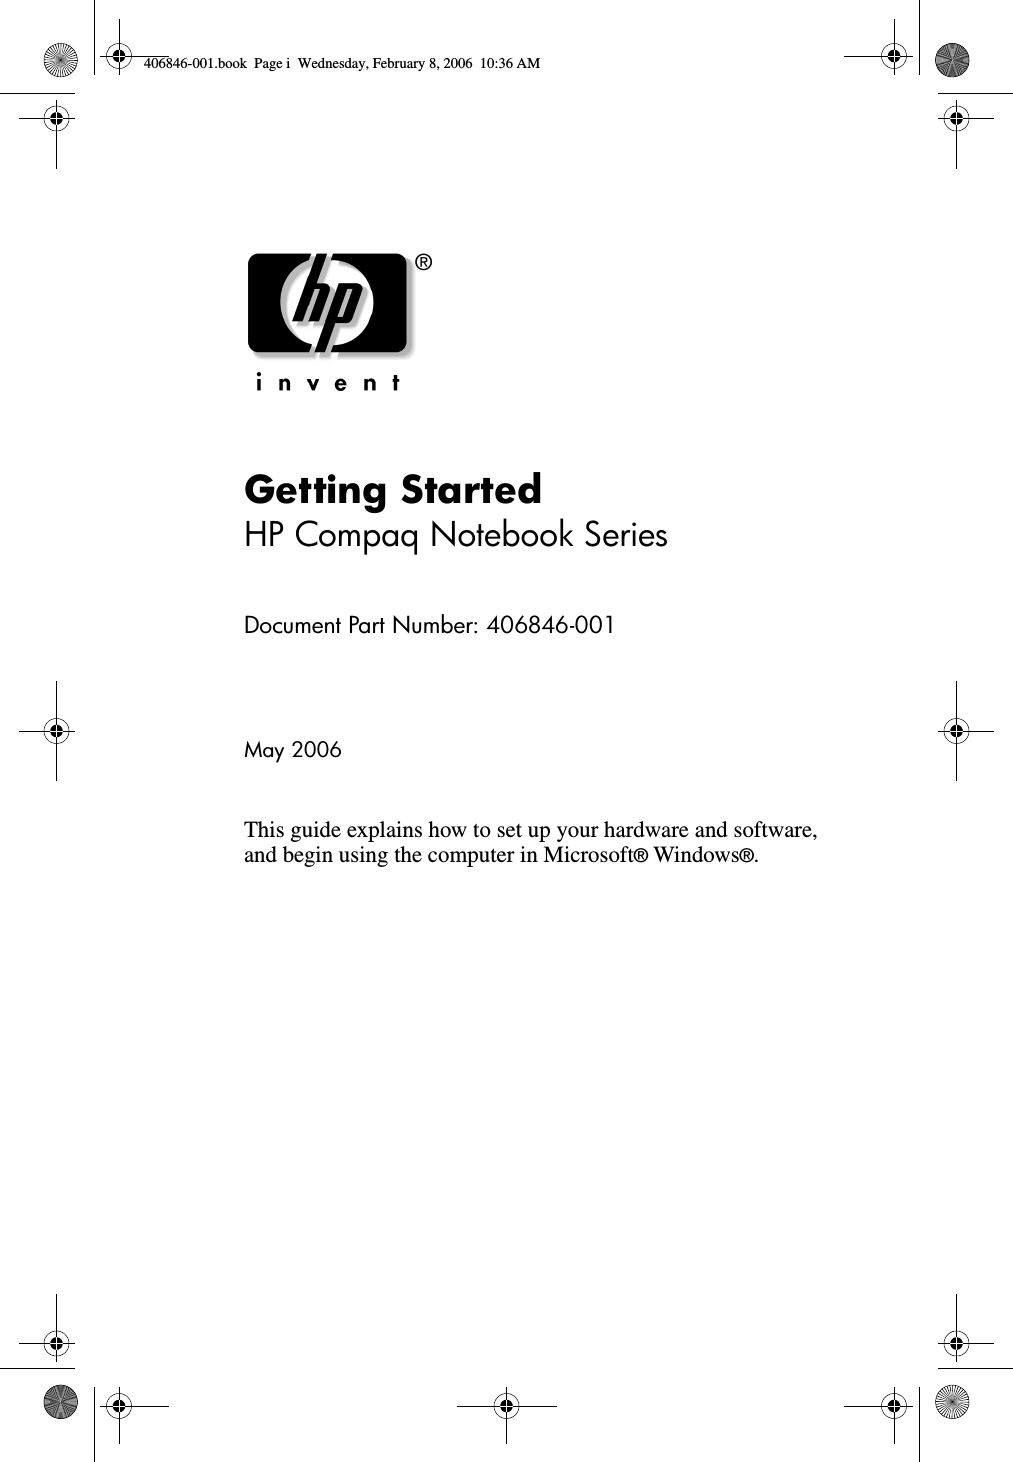 Getting StartedHP Compaq Notebook SeriesDocument Part Number: 406846-001May 2006This guide explains how to set up your hardware and software, and begin using the computer in Microsoft® Windows®.406846-001.book  Page i  Wednesday, February 8, 2006  10:36 AM